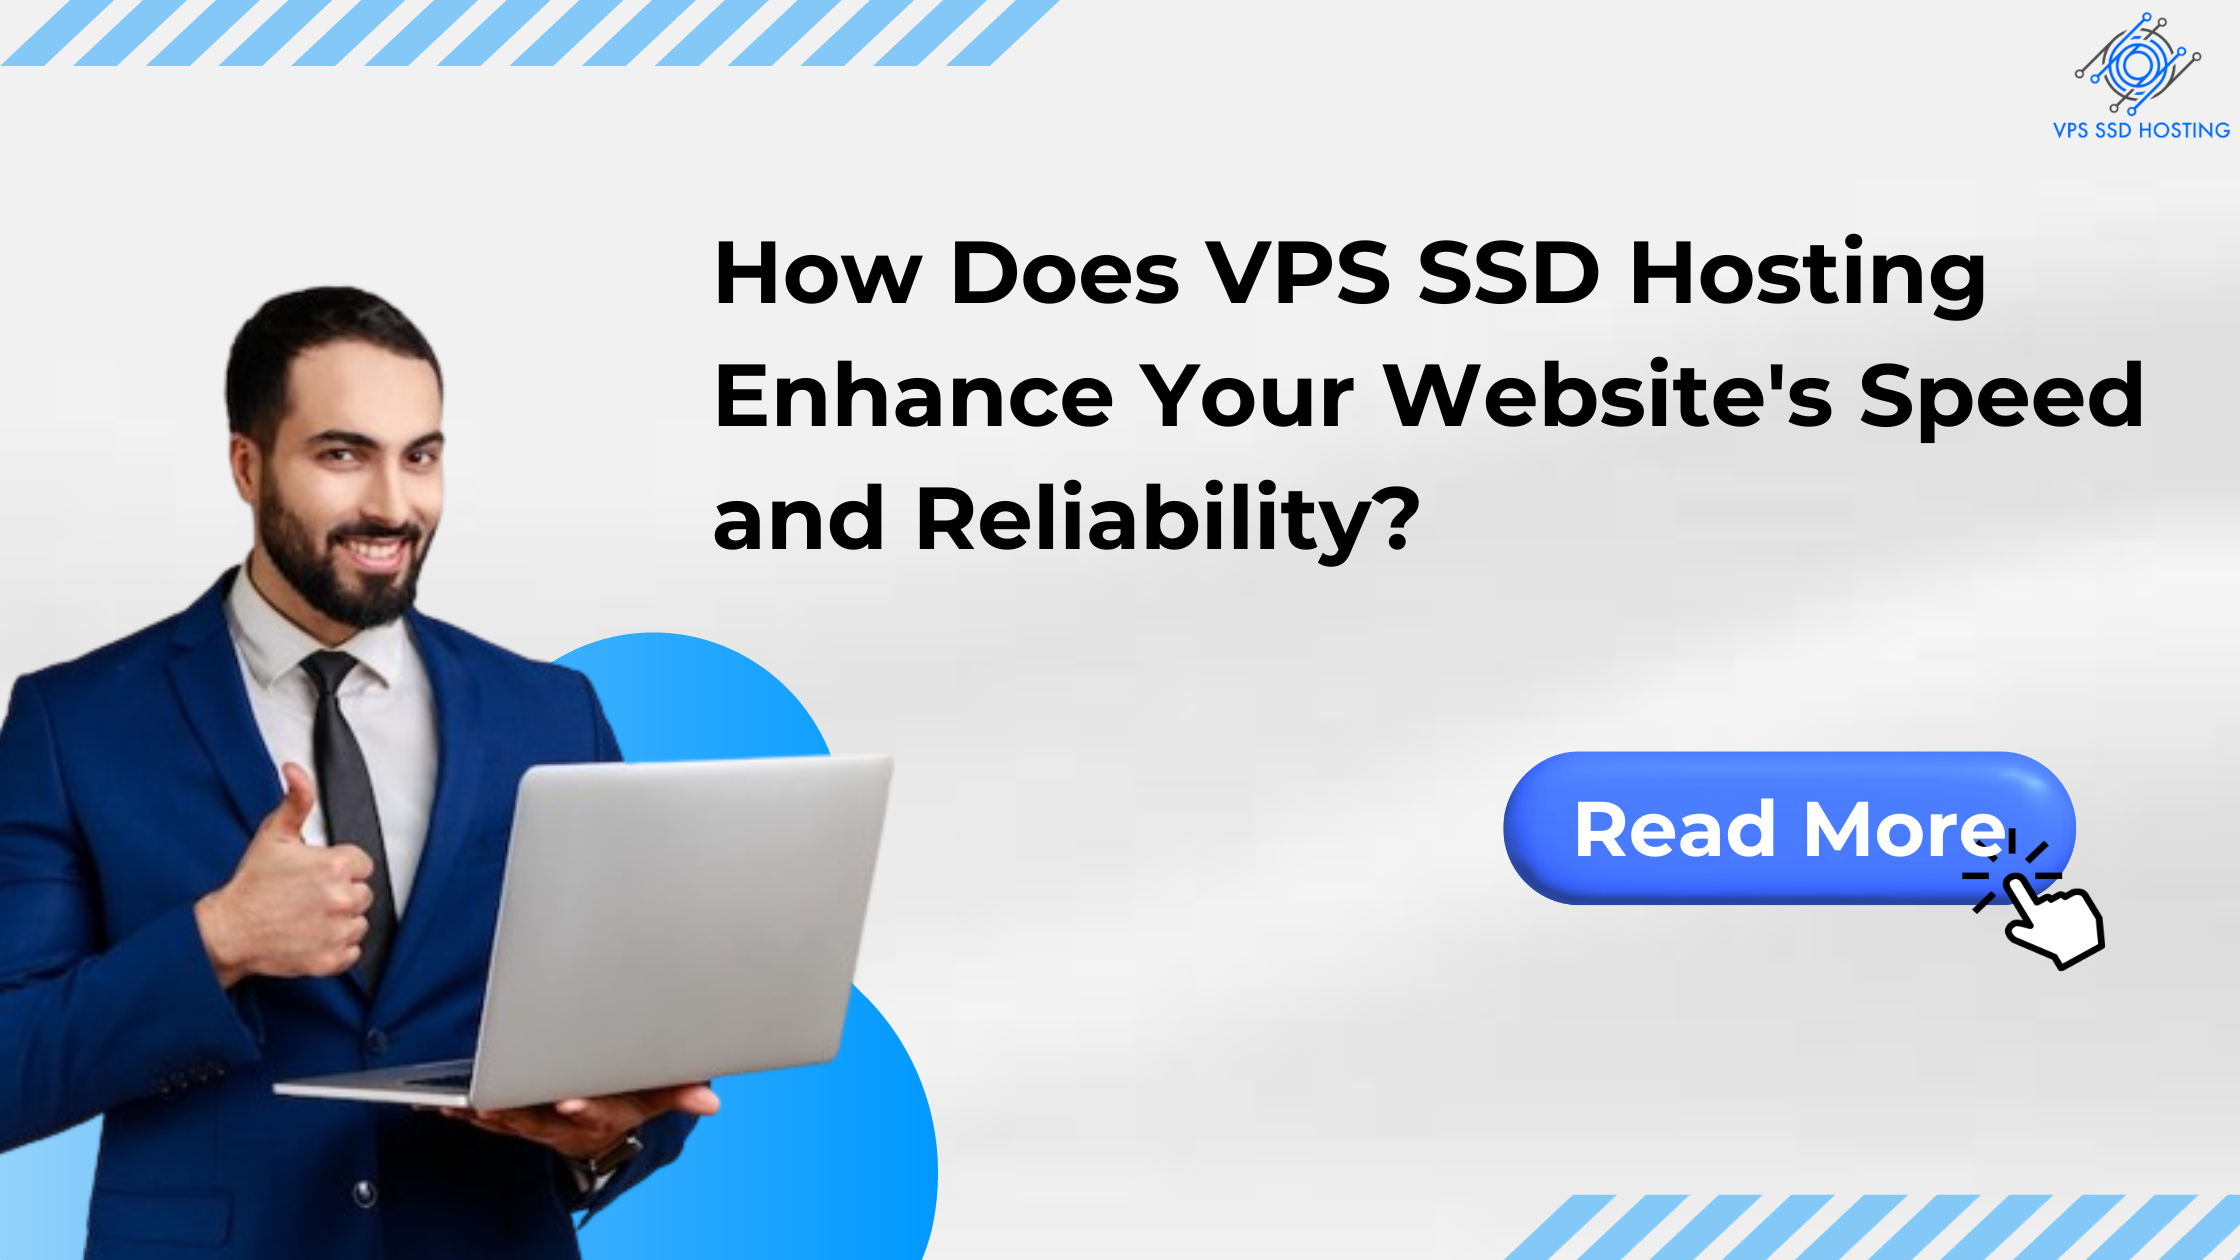 How Does VPS SSD Hosting Enhance Your Website’s Speed and Reliability?